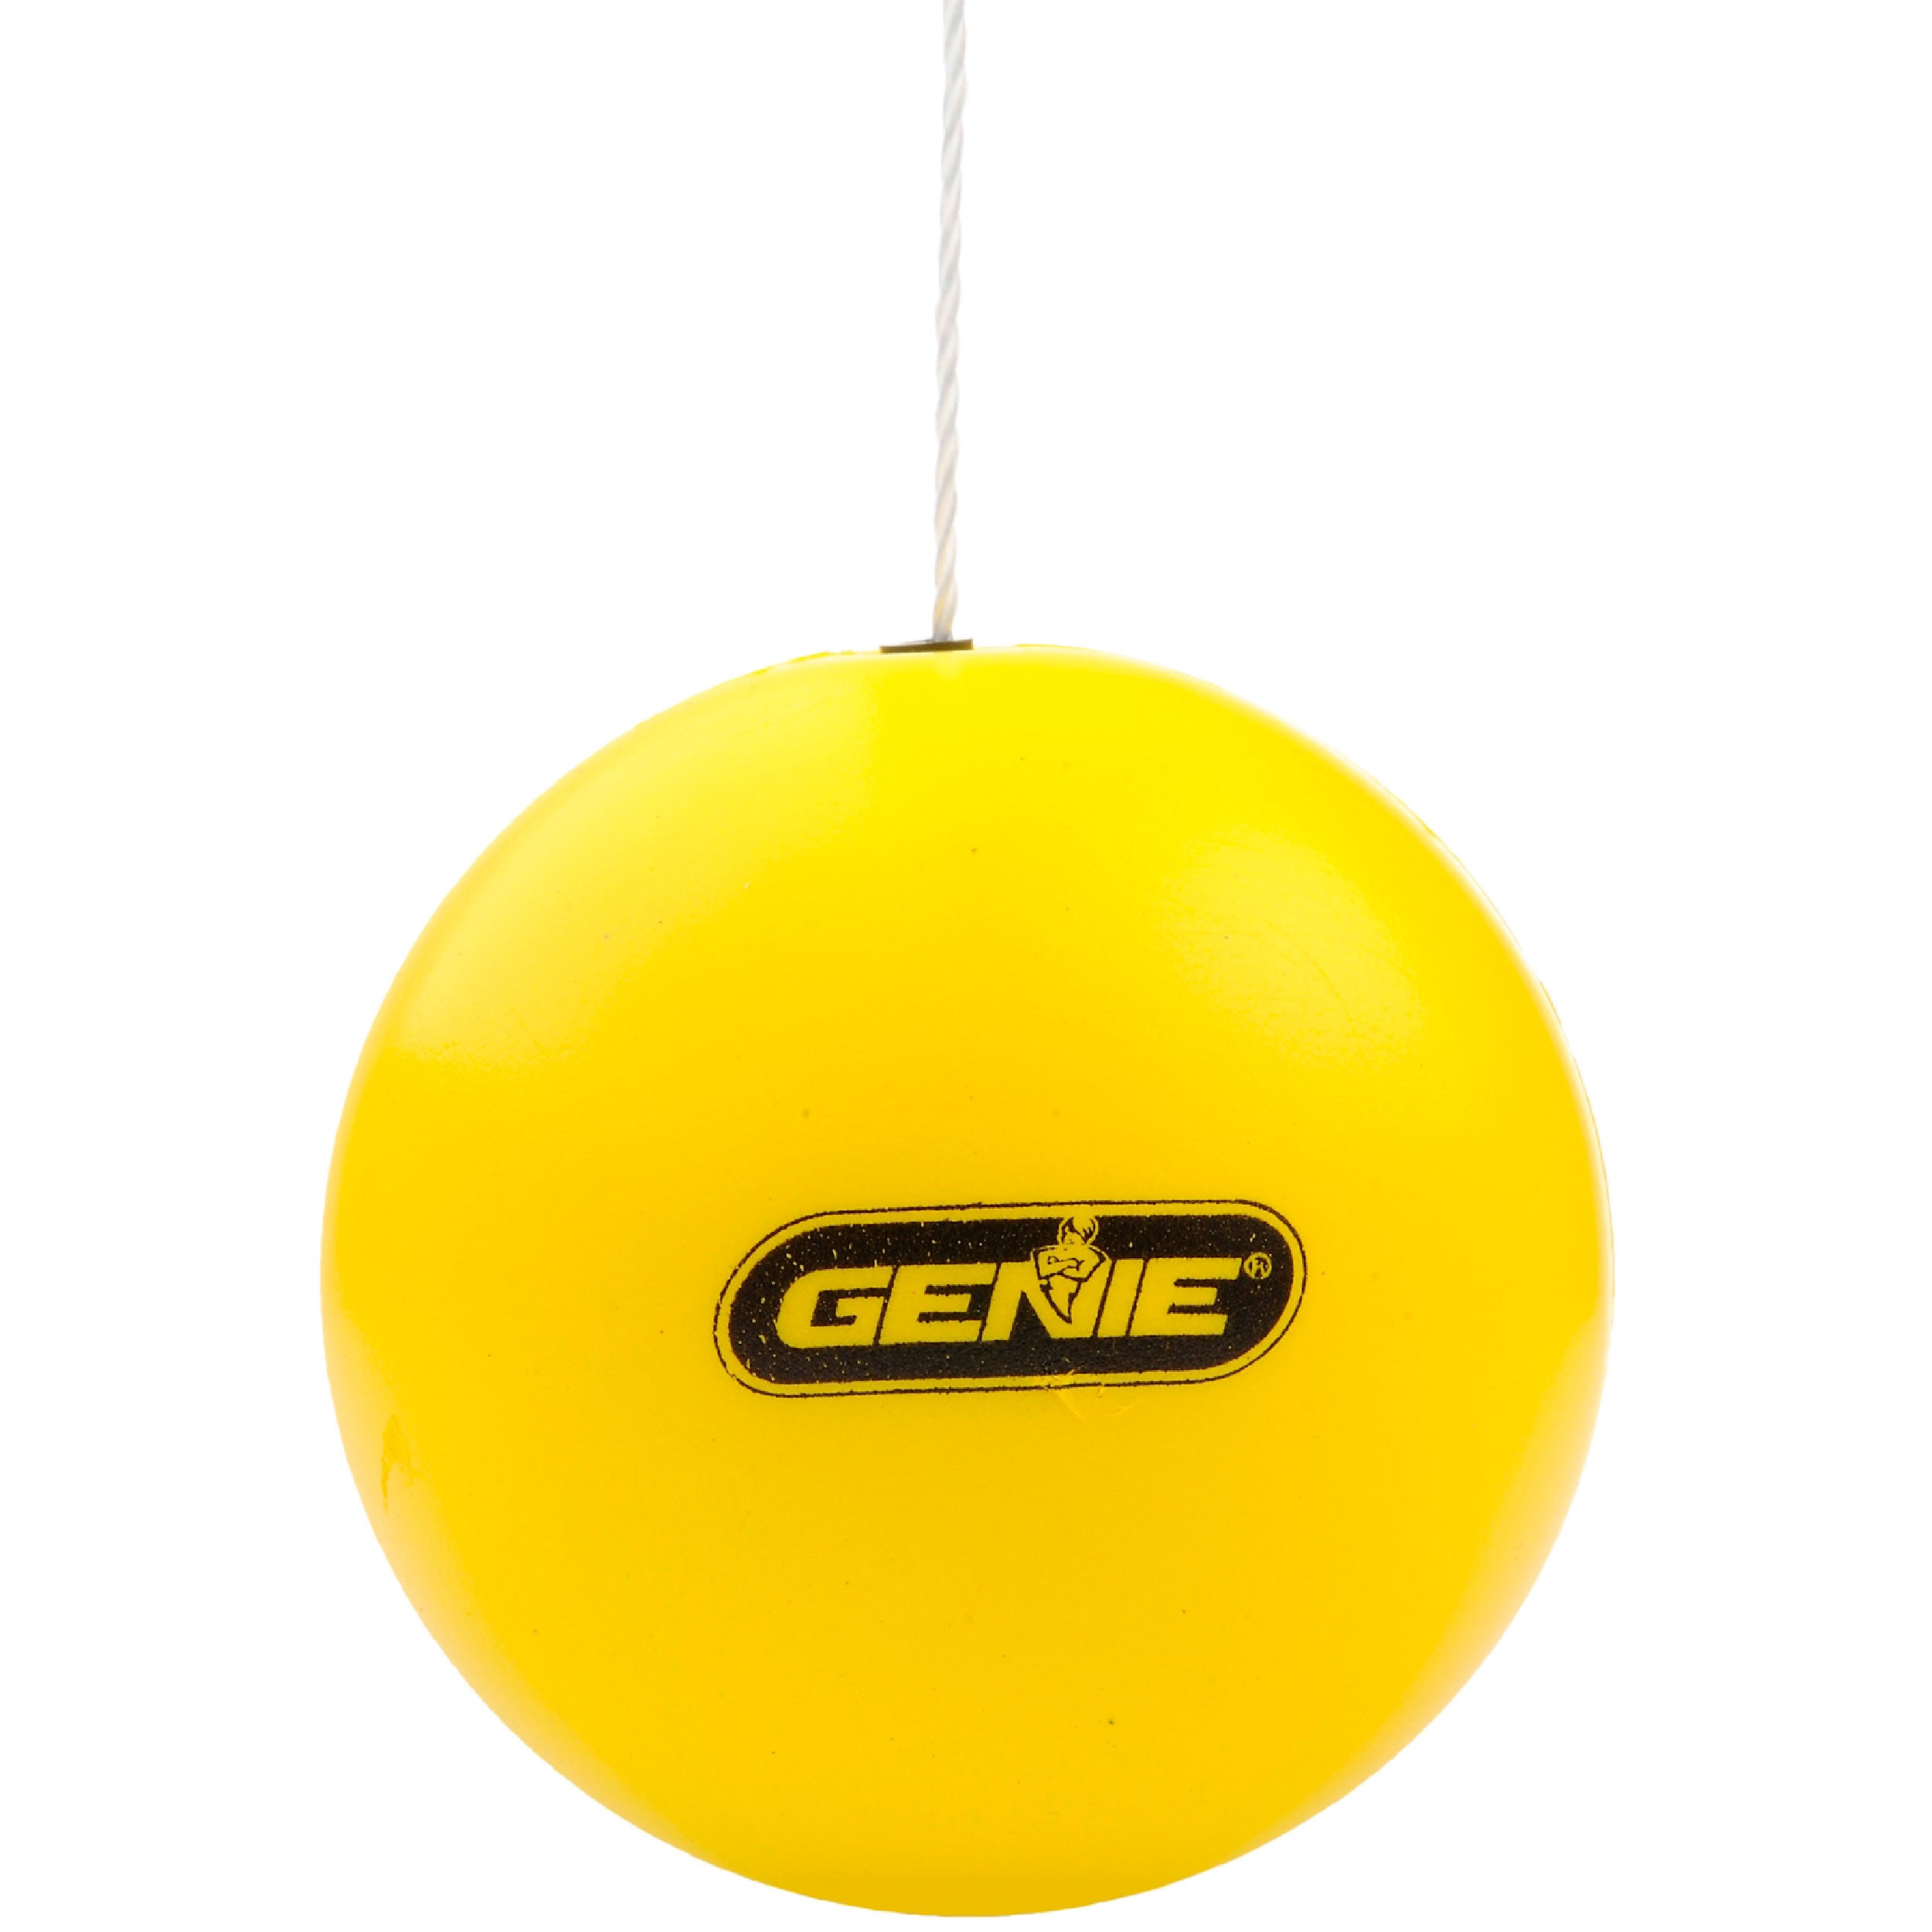 PAUTO-P Double Garage Parking Aid-Parking Ball Guide SystemParking  Assistant kit Includes a retracting Ball Sensor Assist Solution.A Perfect Garage  Parking Indicator 